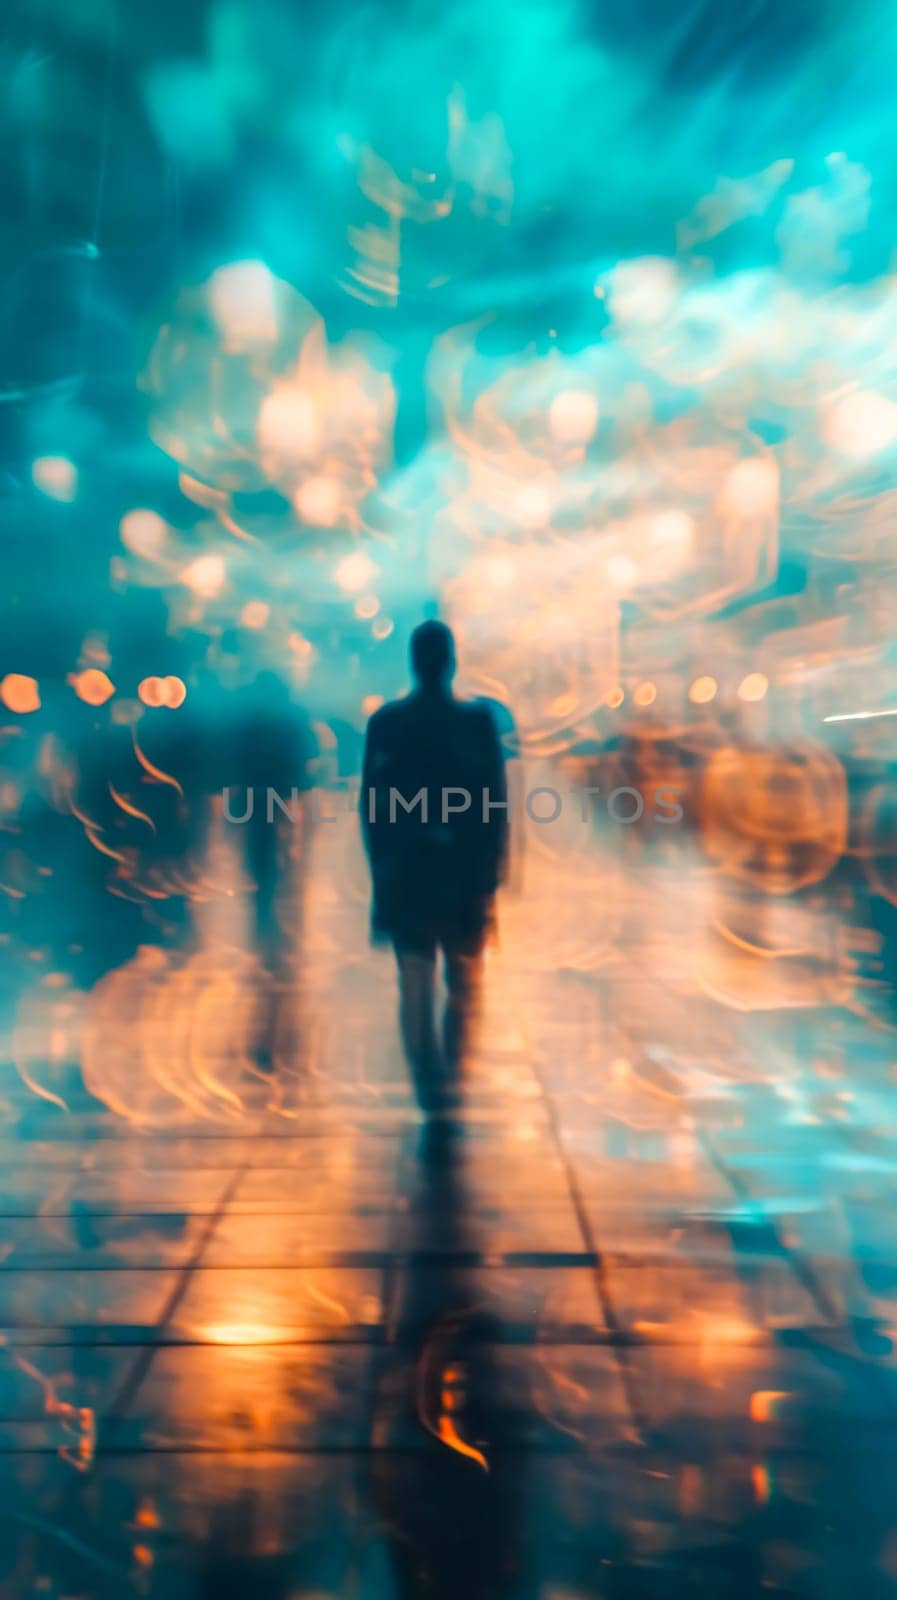 dreamlike vision of silhouetted figures walking through a blur of golden and turquoise light, creating an effect of movement and a sense of mystery or contemplation, vertical